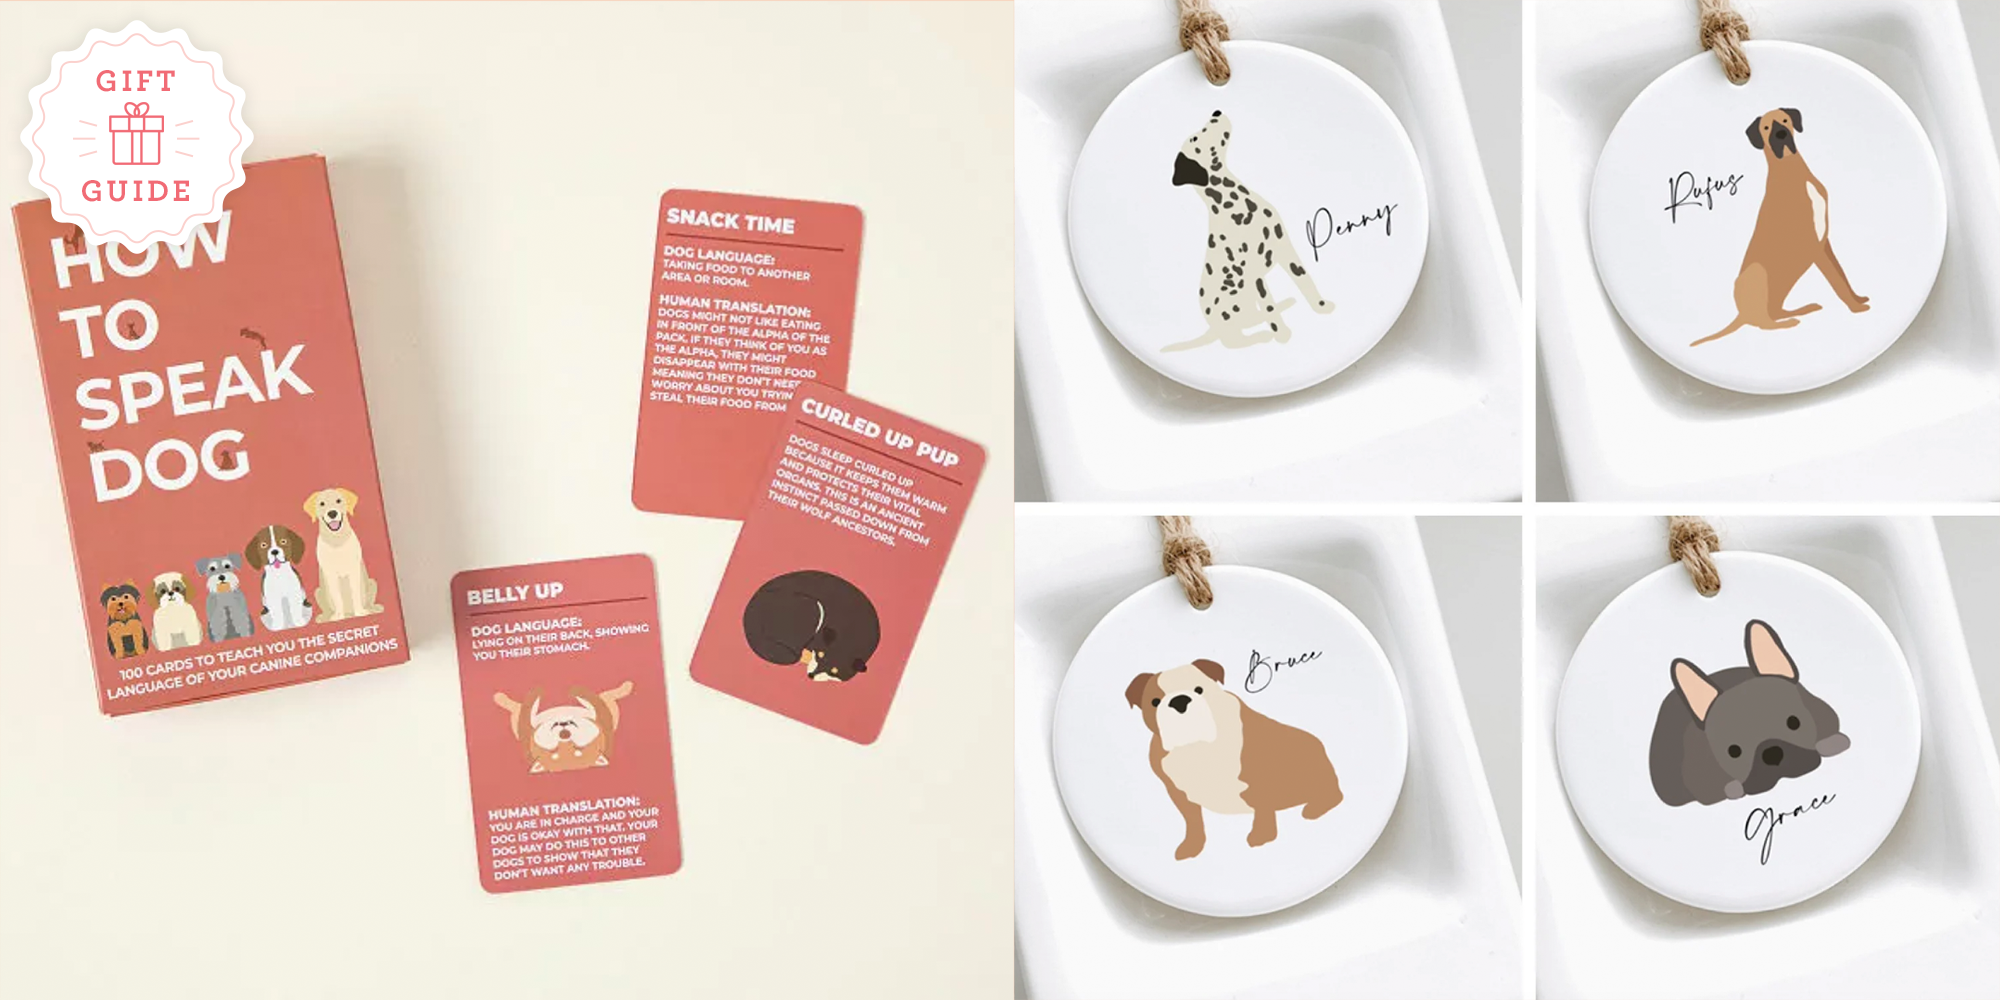 30 Best Gifts For Dog Lovers 2023 - Unique Gifts For Dog Moms